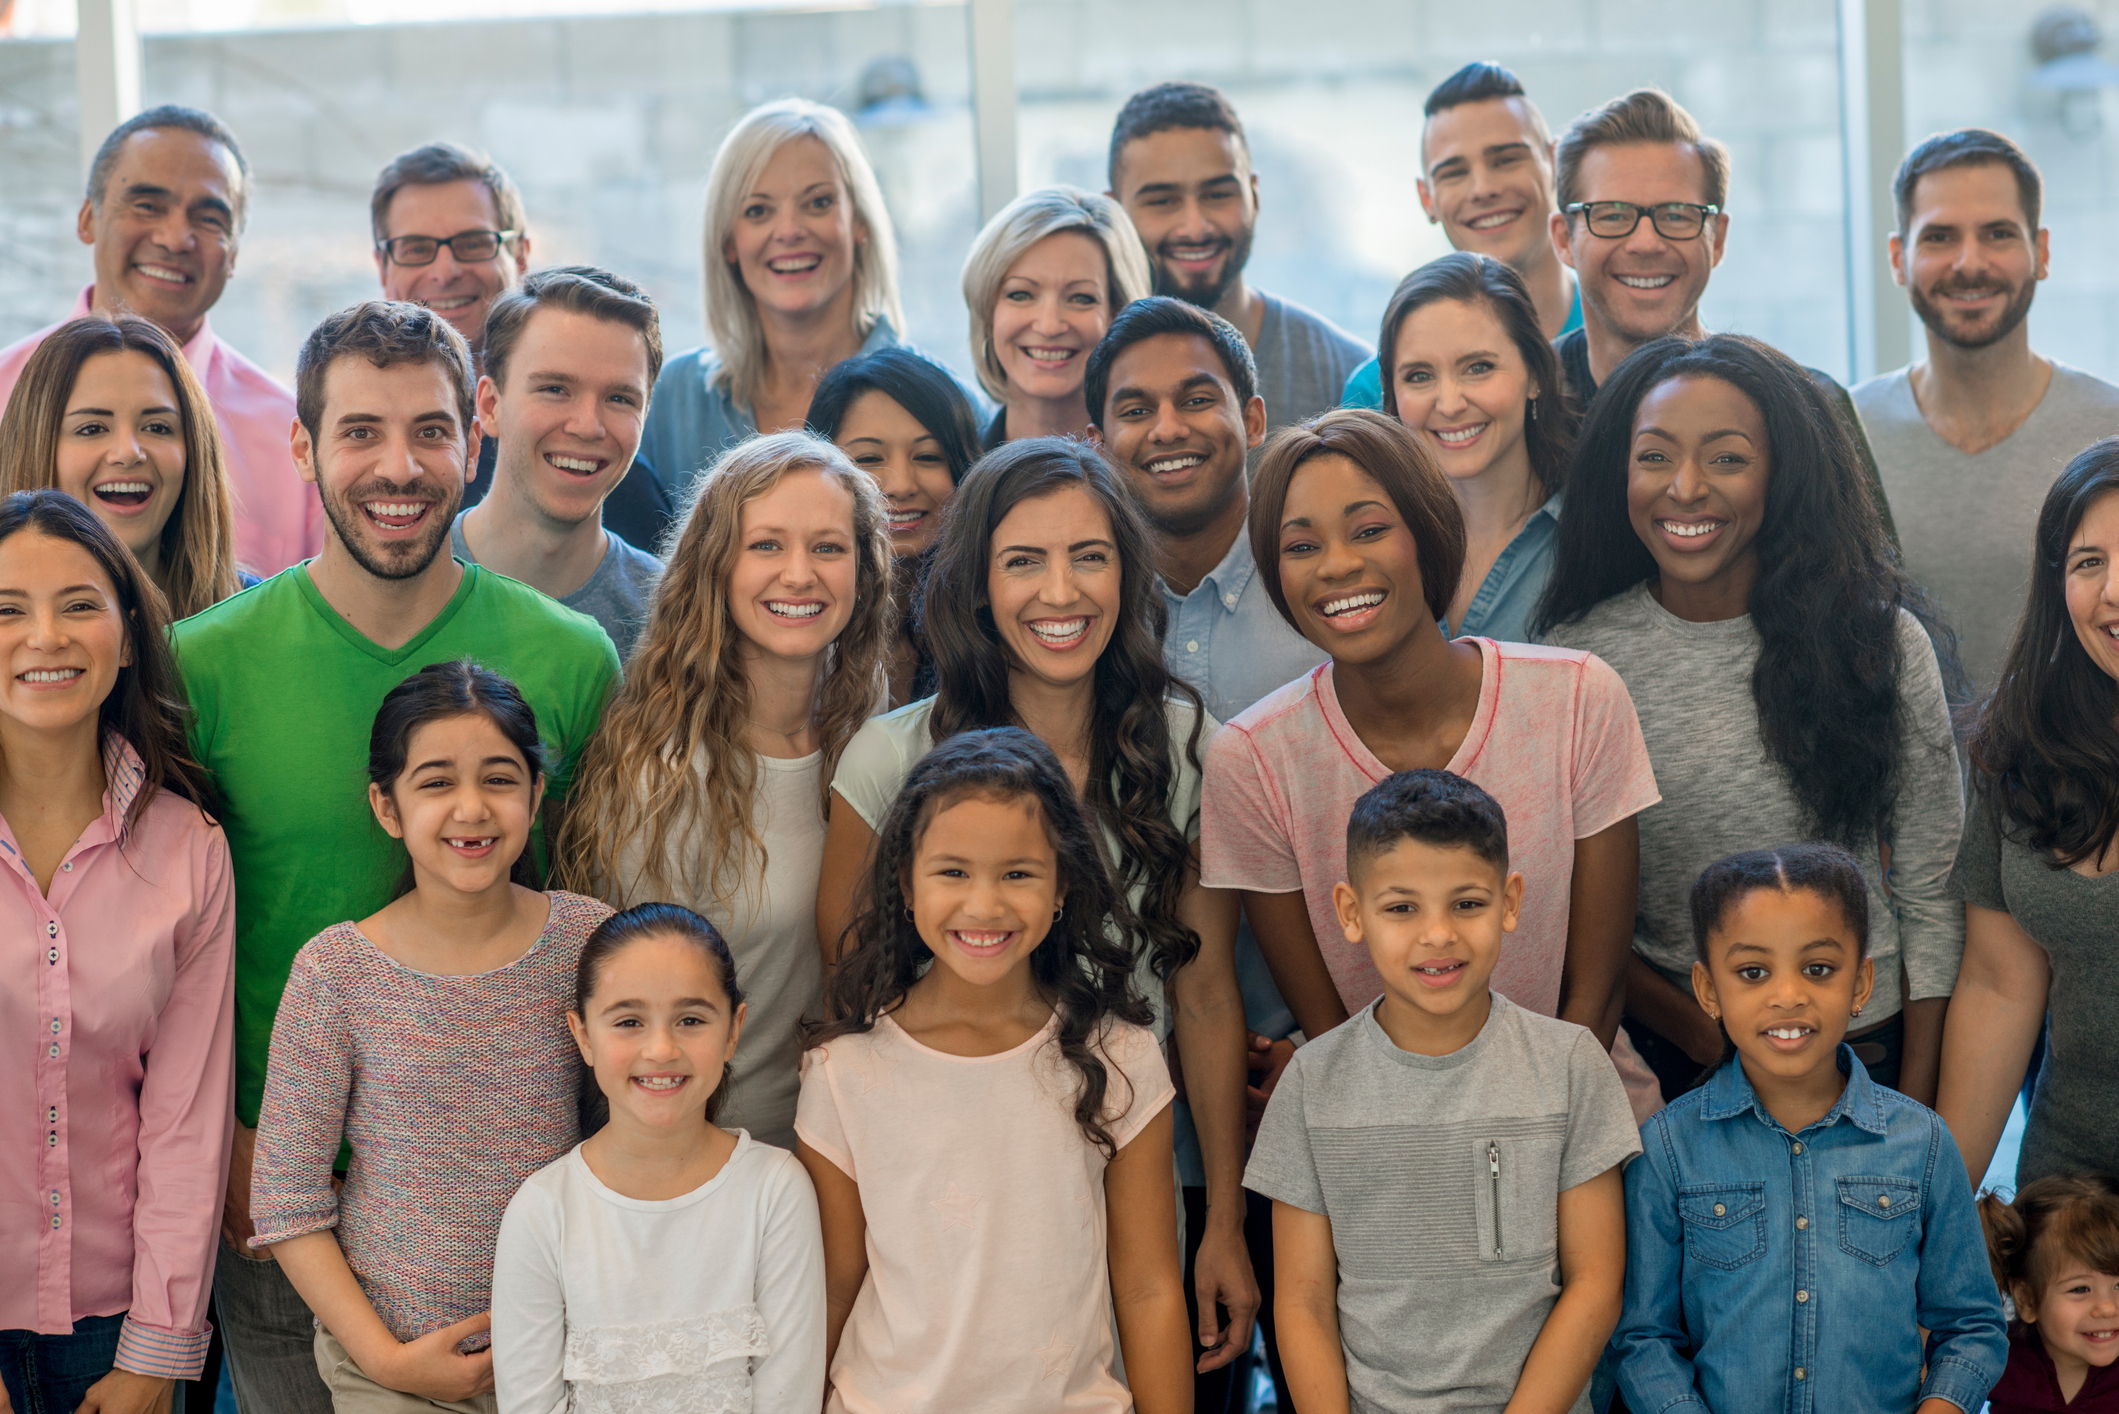 A multi-ethnic group of people are standing together in a room smiling and laughing. This is a diverse group of adults and children, with young children and seniors all together.